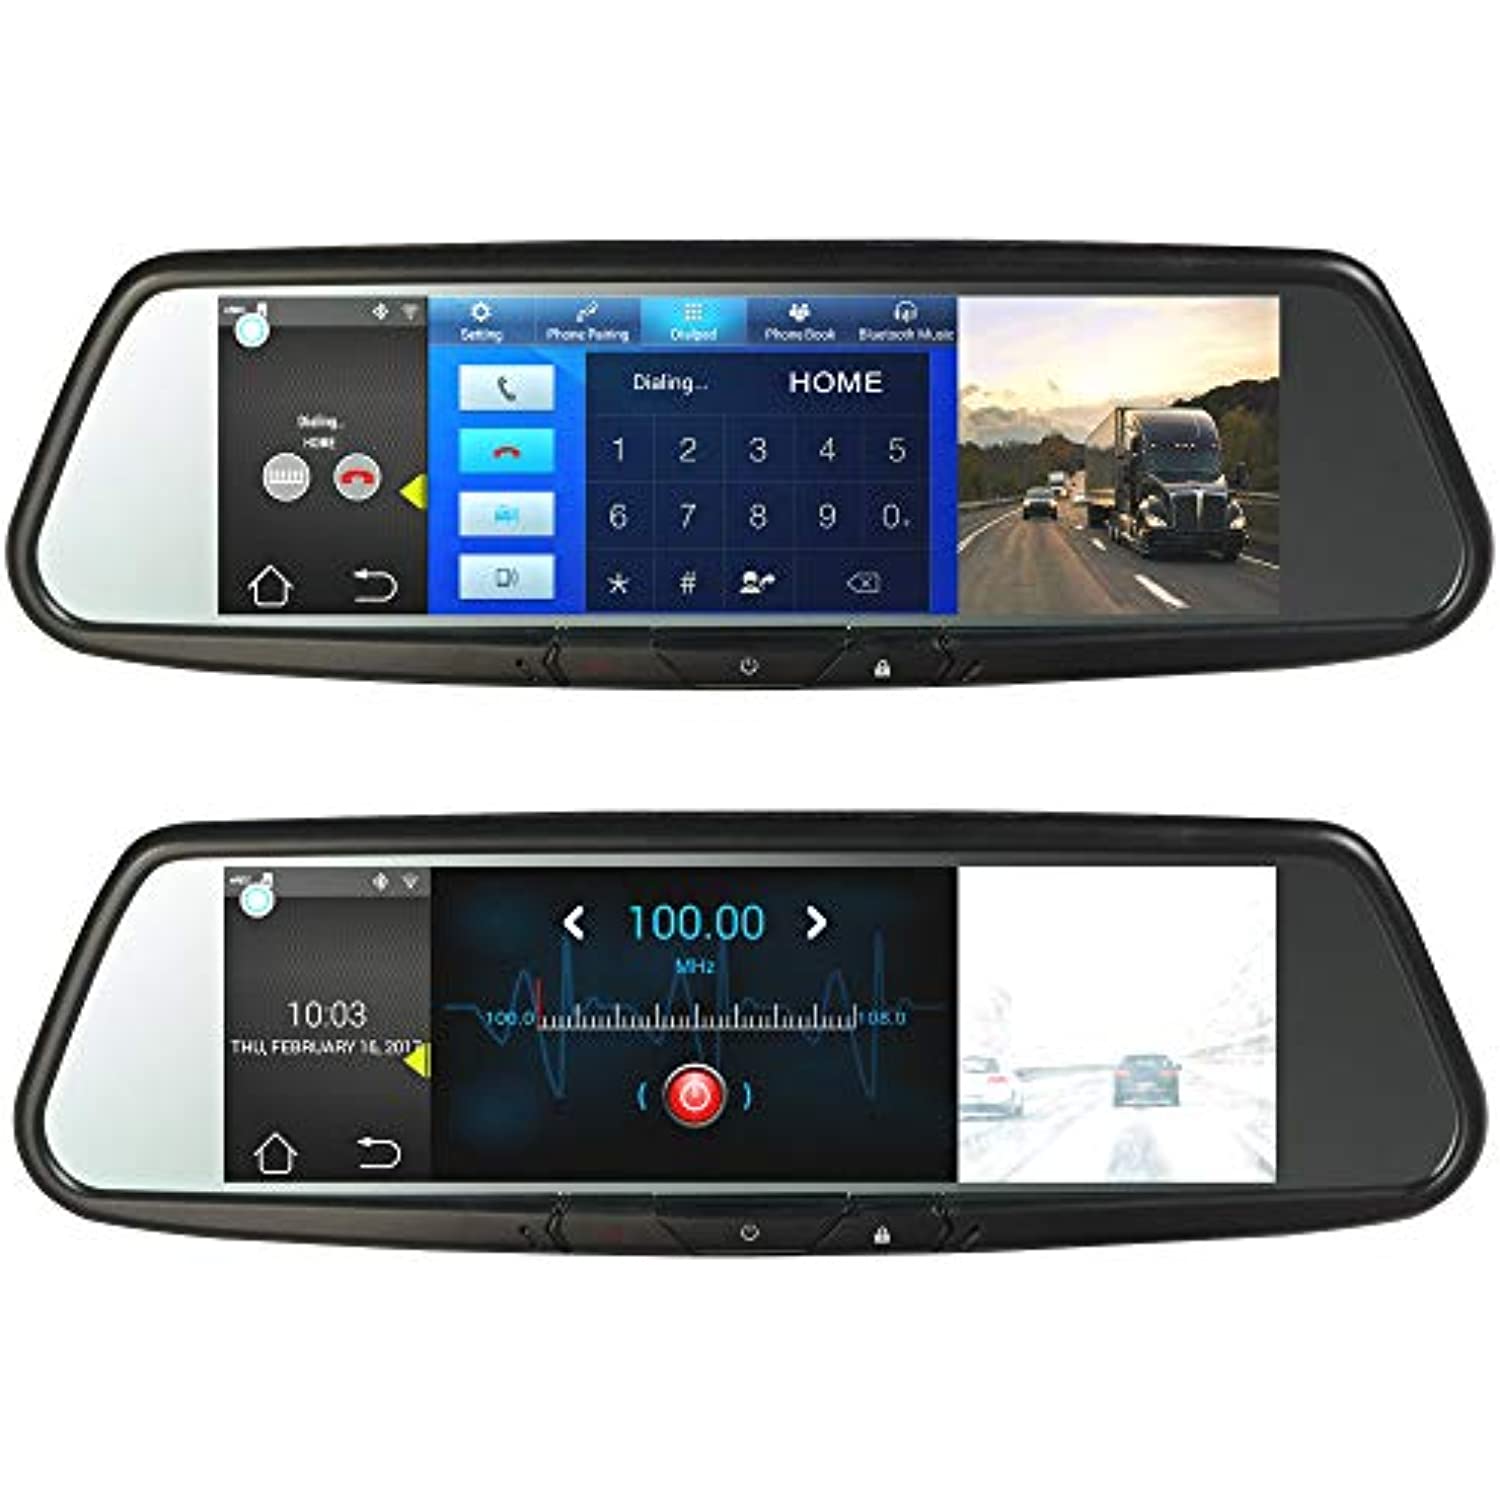 Advent RVM740SMN Android Based Full View Replacement Smart Rear View Mirror w/7.8" Monitor with Navigation